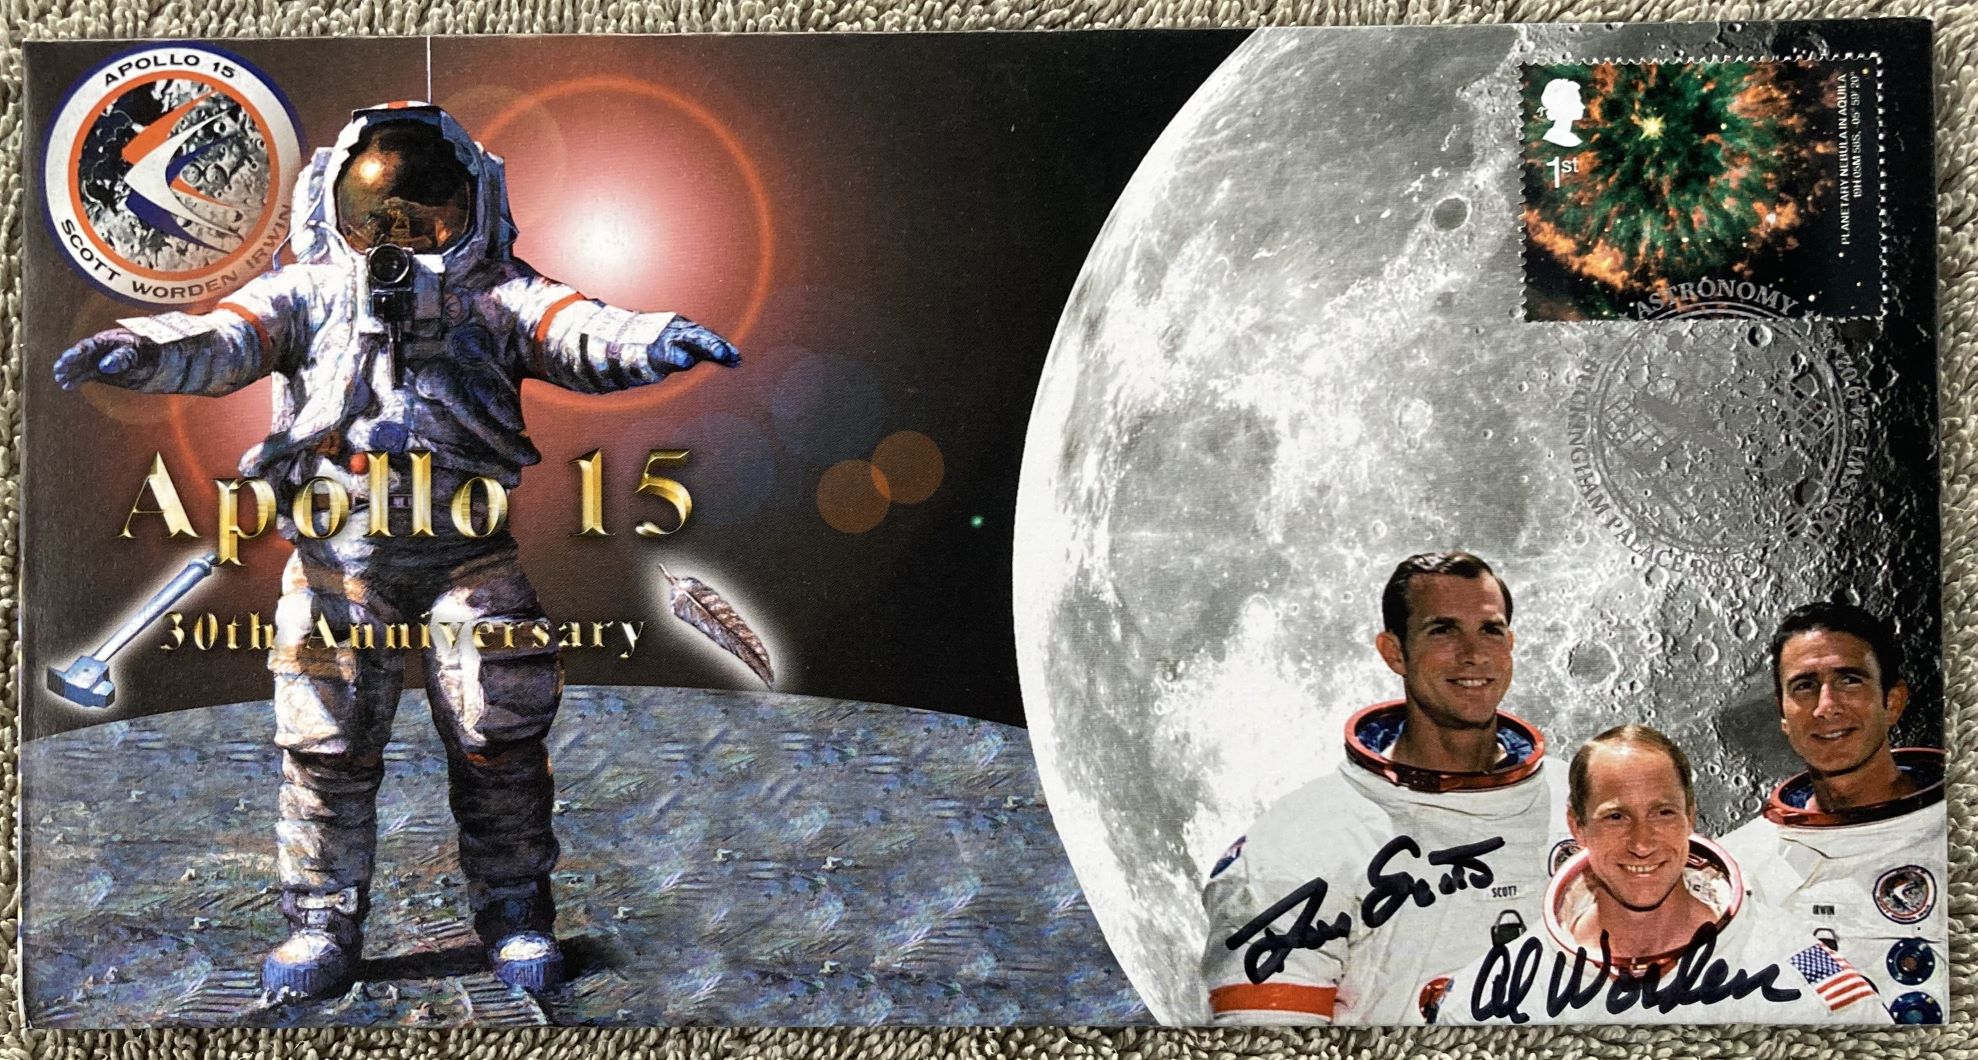 Apollo 15 moonwalker Dave Scott Alfred Worden signed Space cover NASA Astronauts. 2001 30th